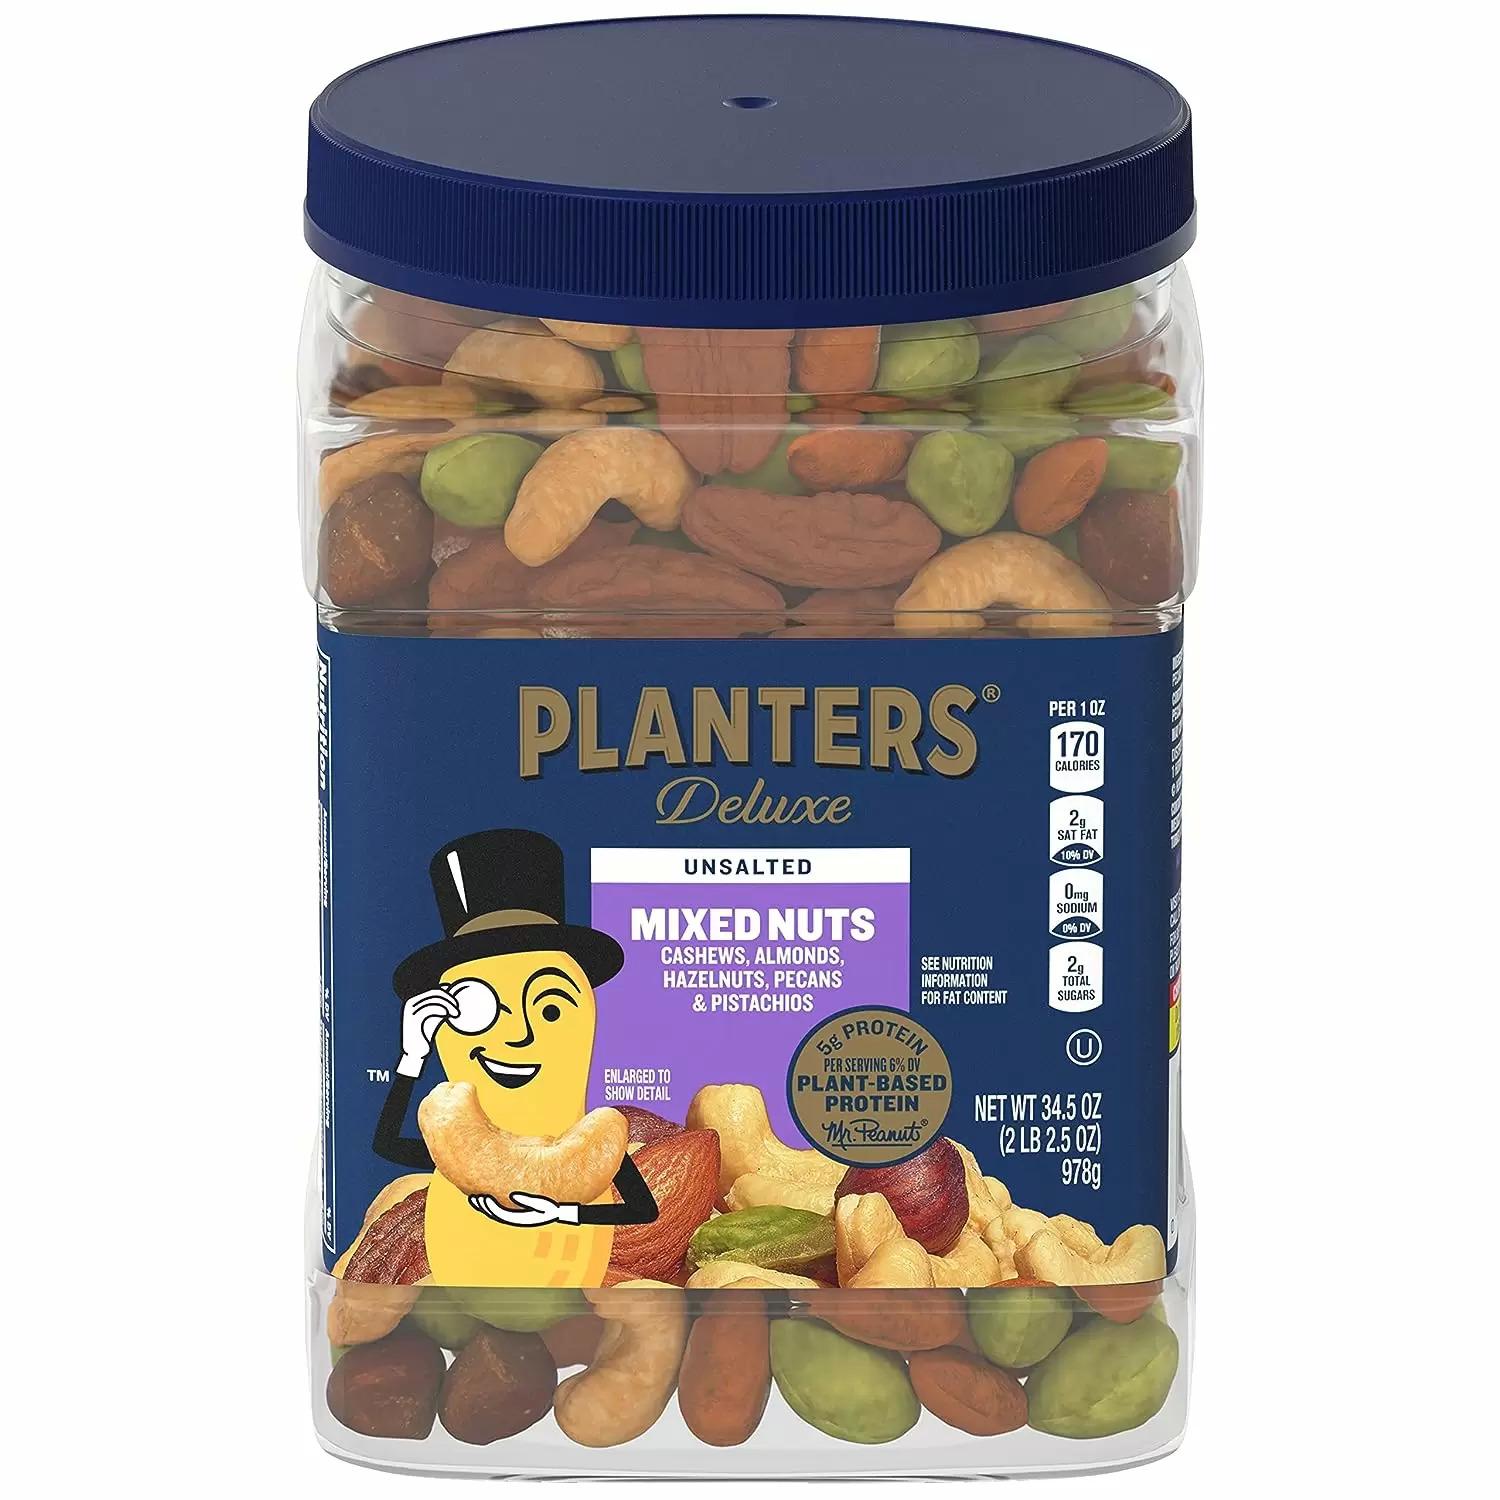 Planters Deluxe Mixed Nuts Unsalted 34oz for $10.43 Shipped